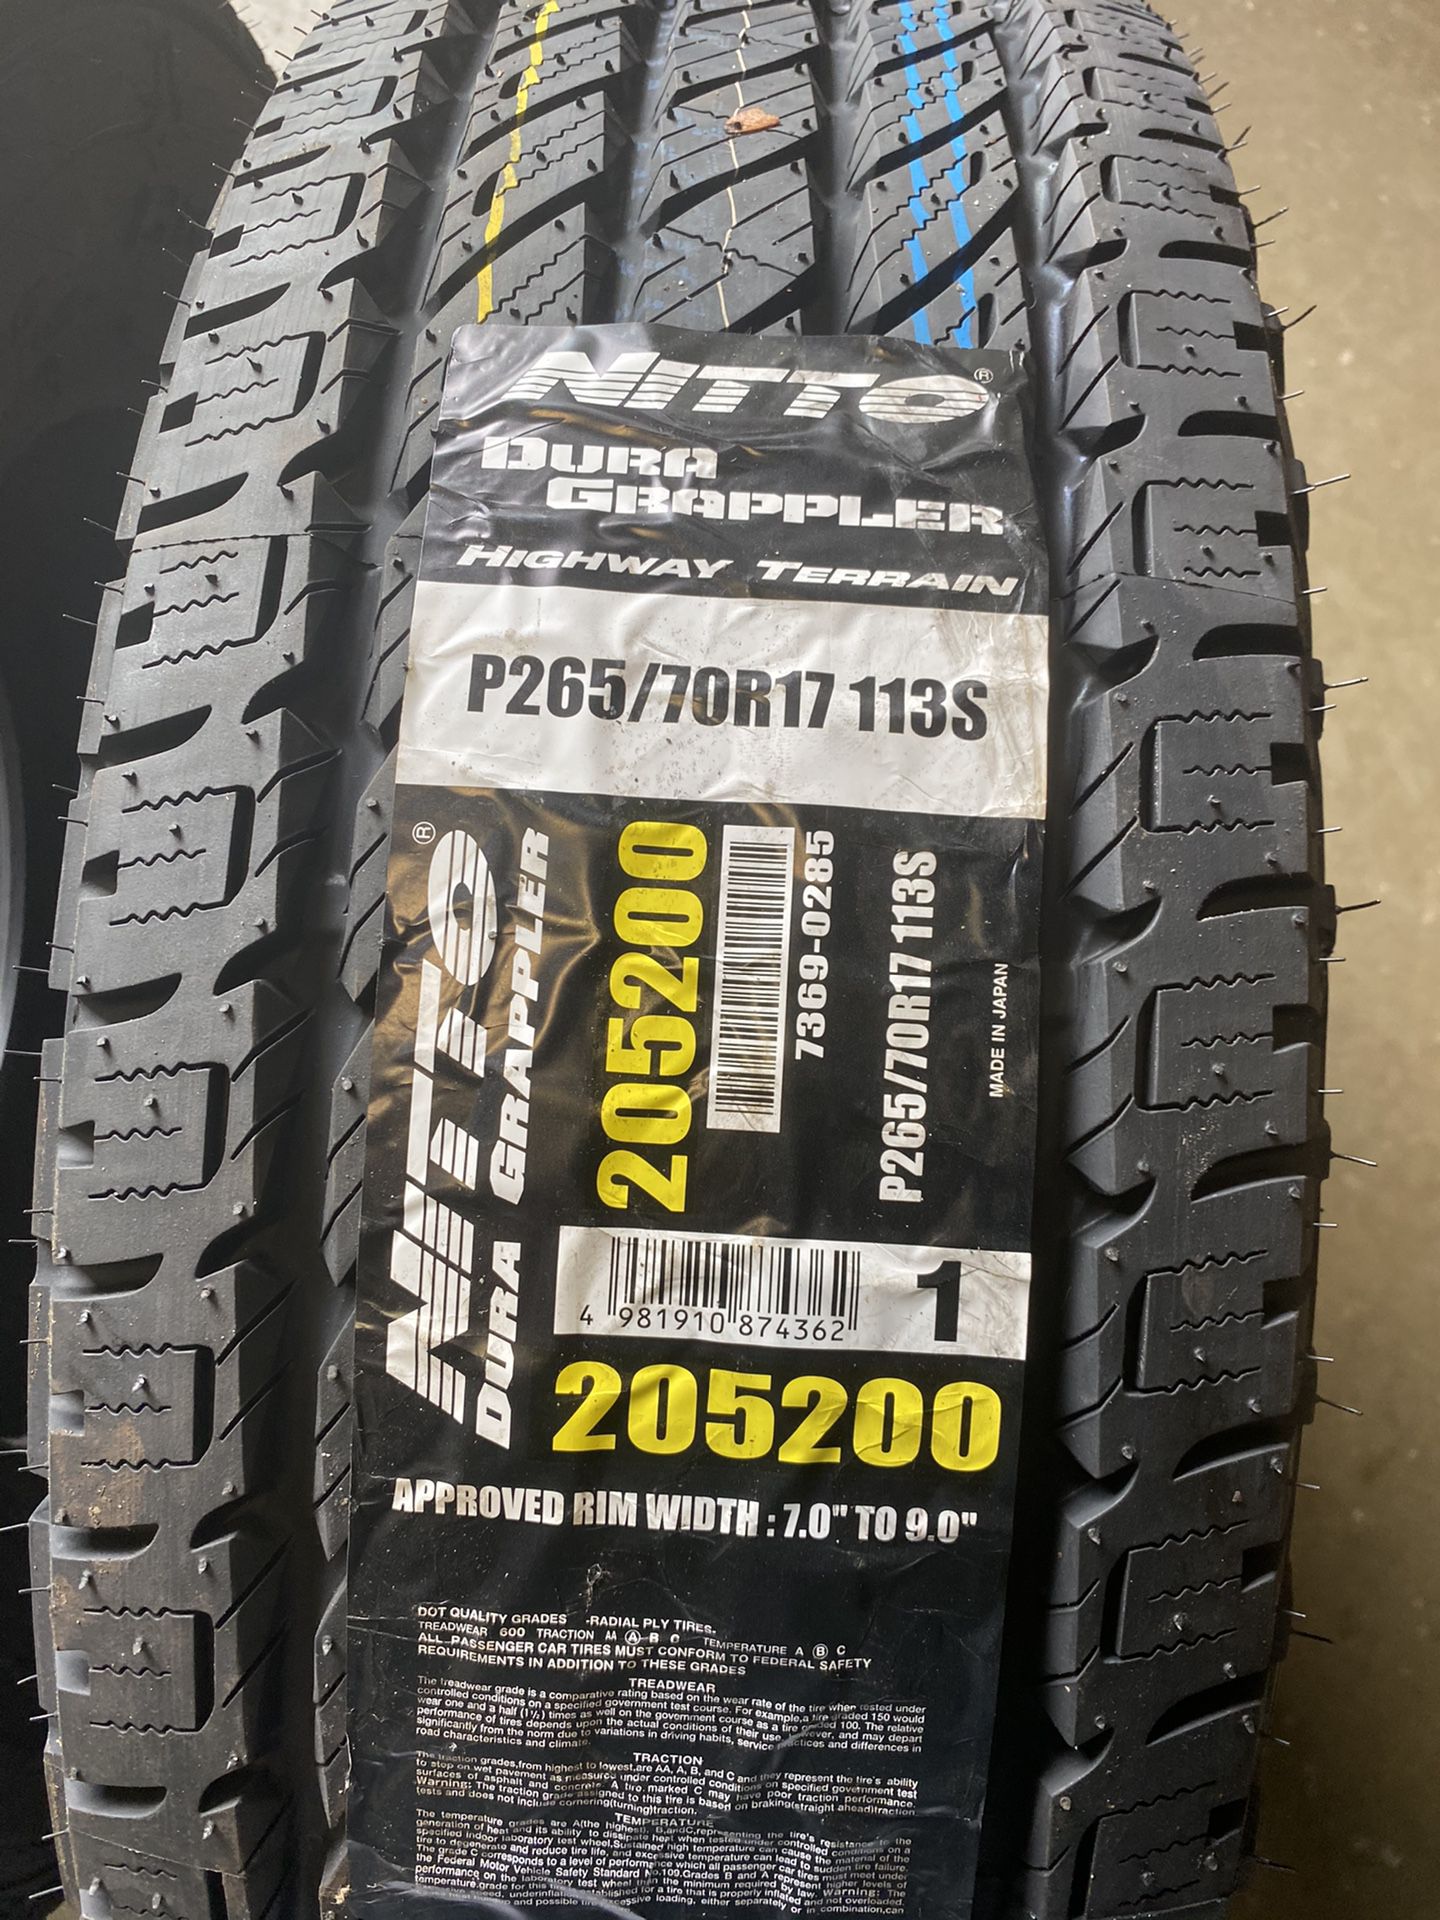 Nitto Dura Grappler 265/70r17 New Tires. set of 2